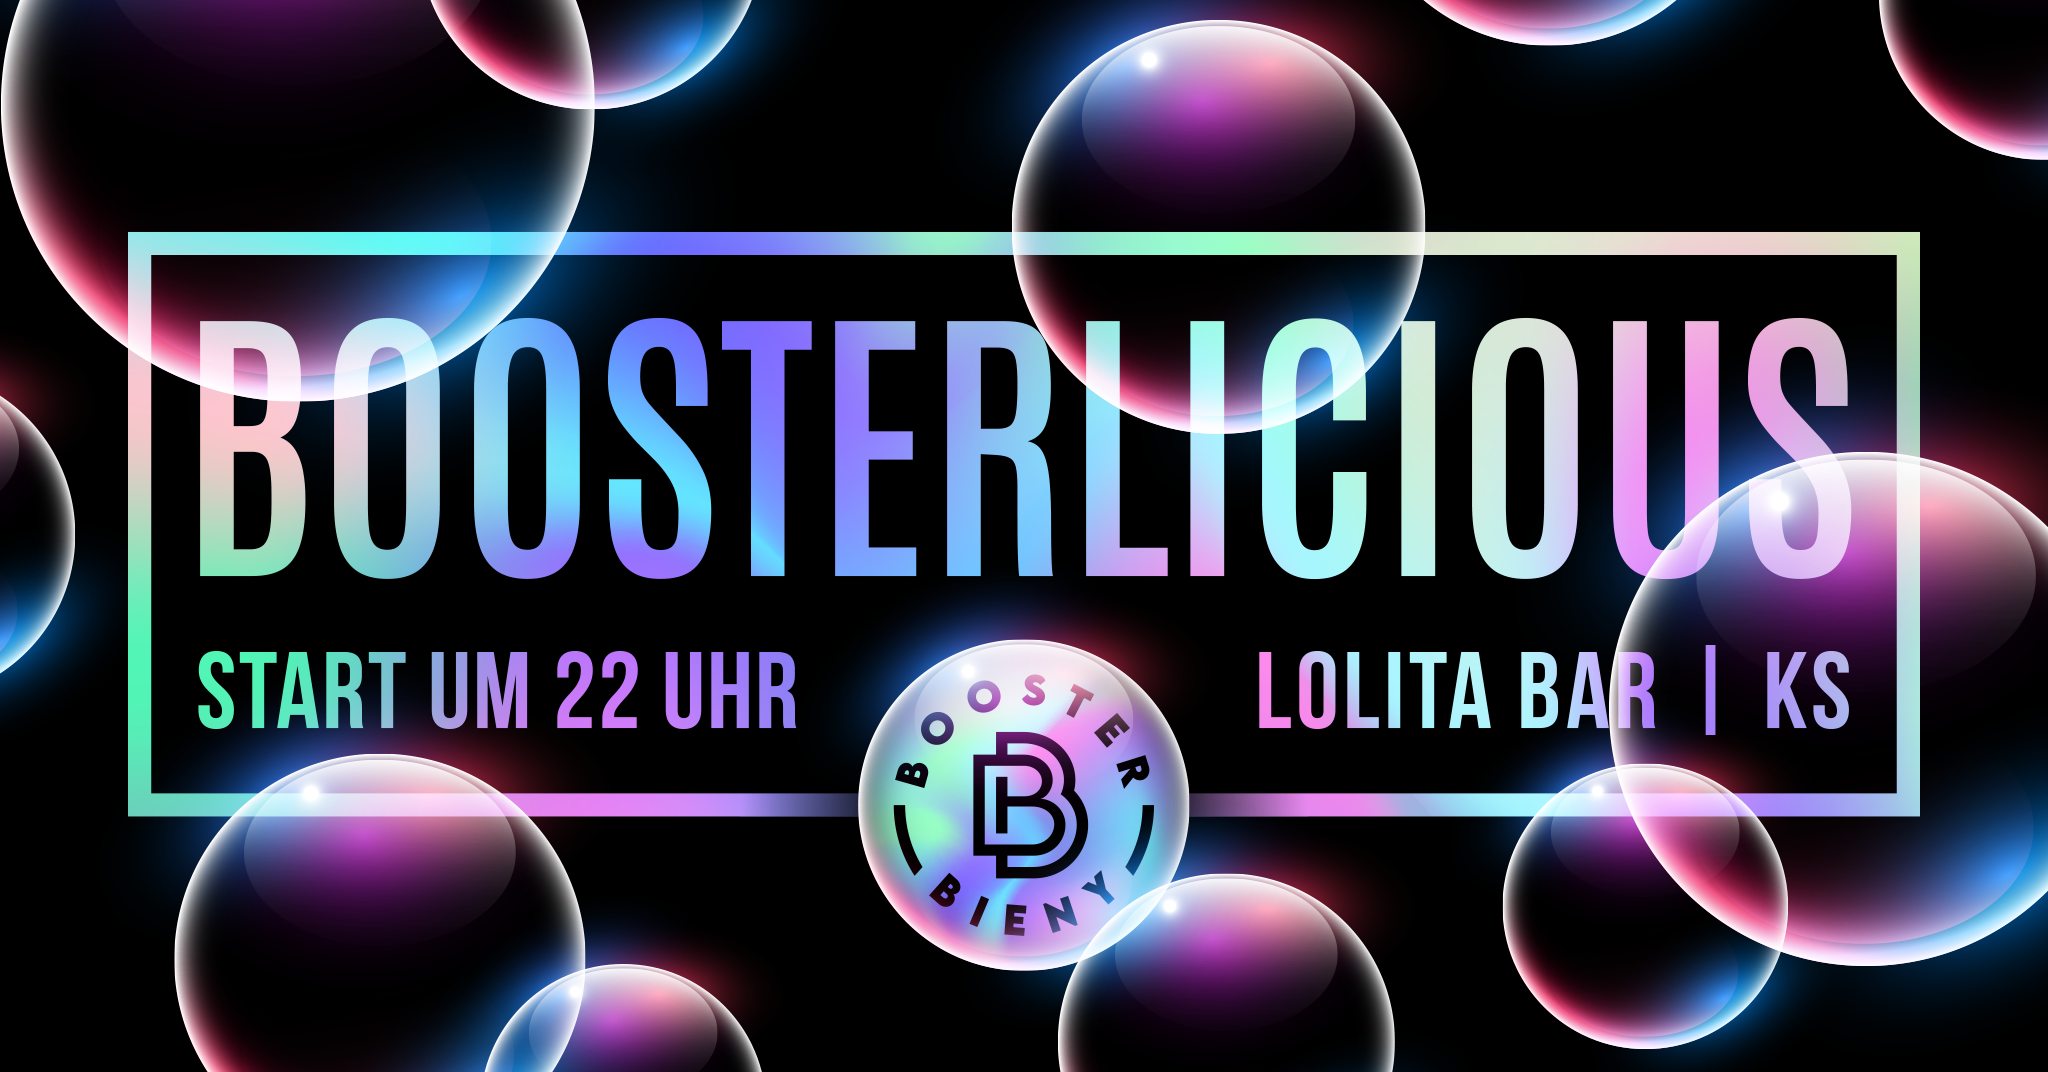 You are currently viewing Boosterlicious – mit DJ Booster Bieny